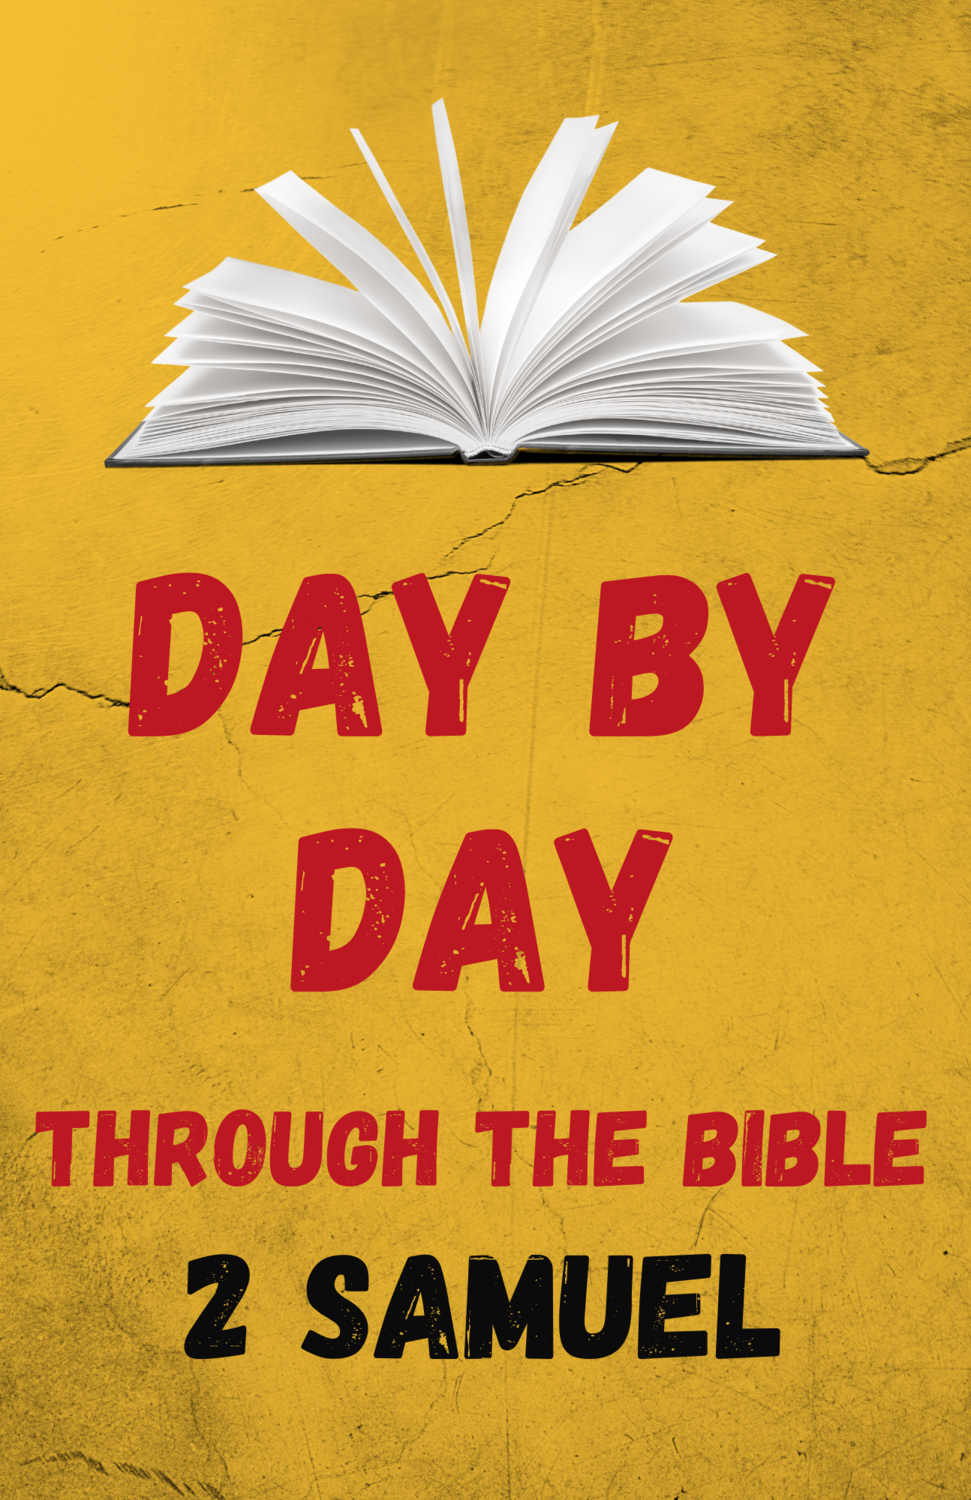 Day By Day Through The Bible: Twenty-Four Days in 2 Samuel - Digital Download